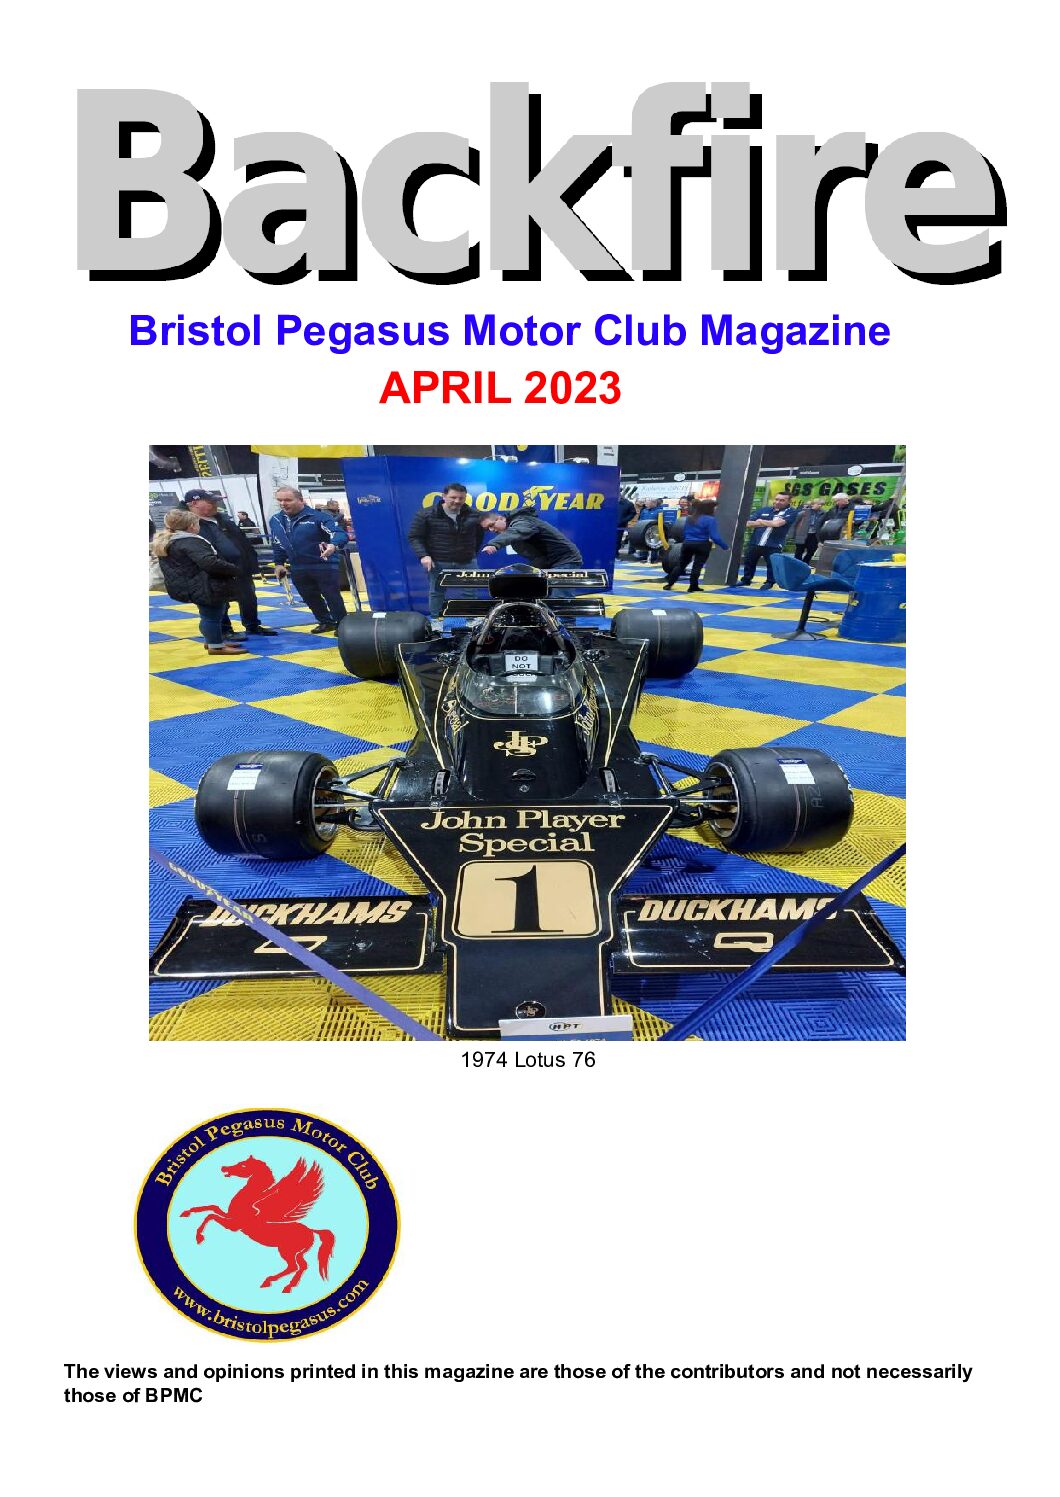 Front cover of April 2023 Issue